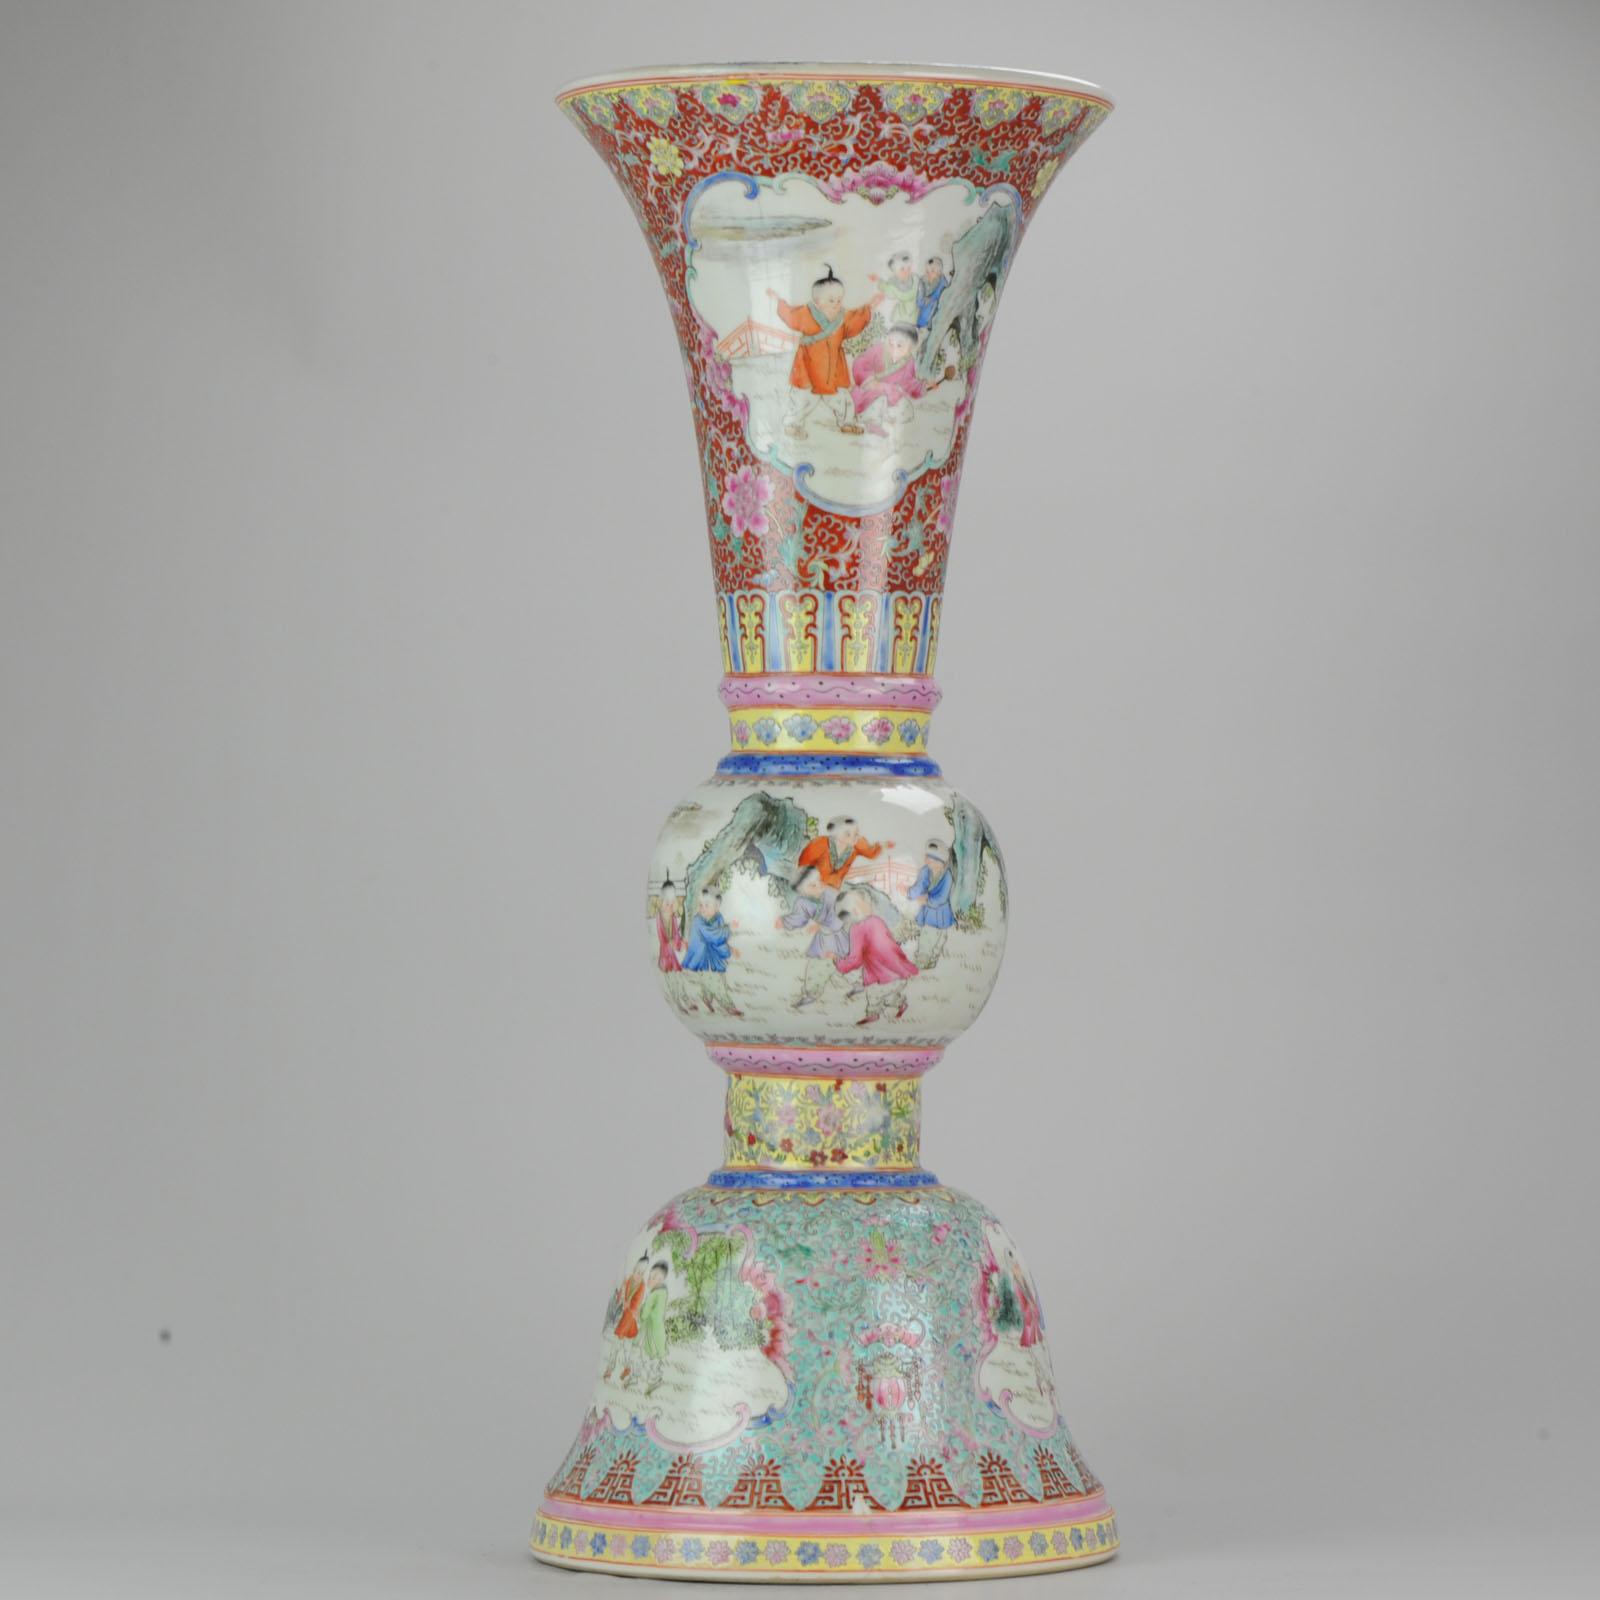 A very nicely decorated vase with a scene of horses in a landscape
Condition
Overall Condition; restoration to the rim and it has been through the middle. Restored. Size: approx. 620mm
Period
20th century PRoC (1949-century).